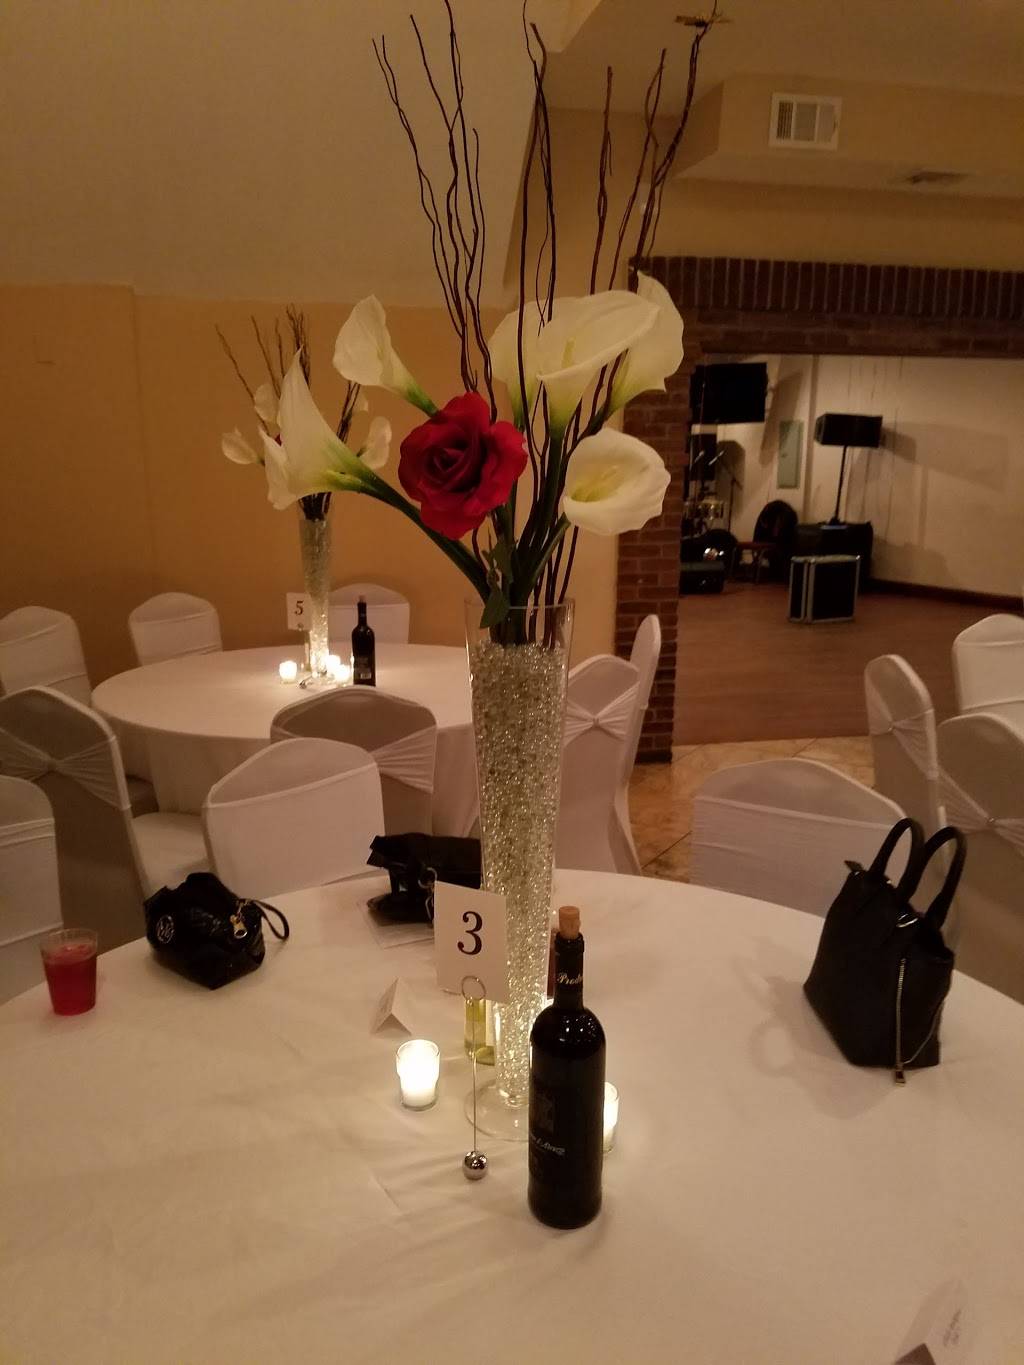 The Gallery Banquet Room | restaurant | 293 Van Duzer St, Staten Island, NY 10304, USA | 7182732200 OR +1 718-273-2200